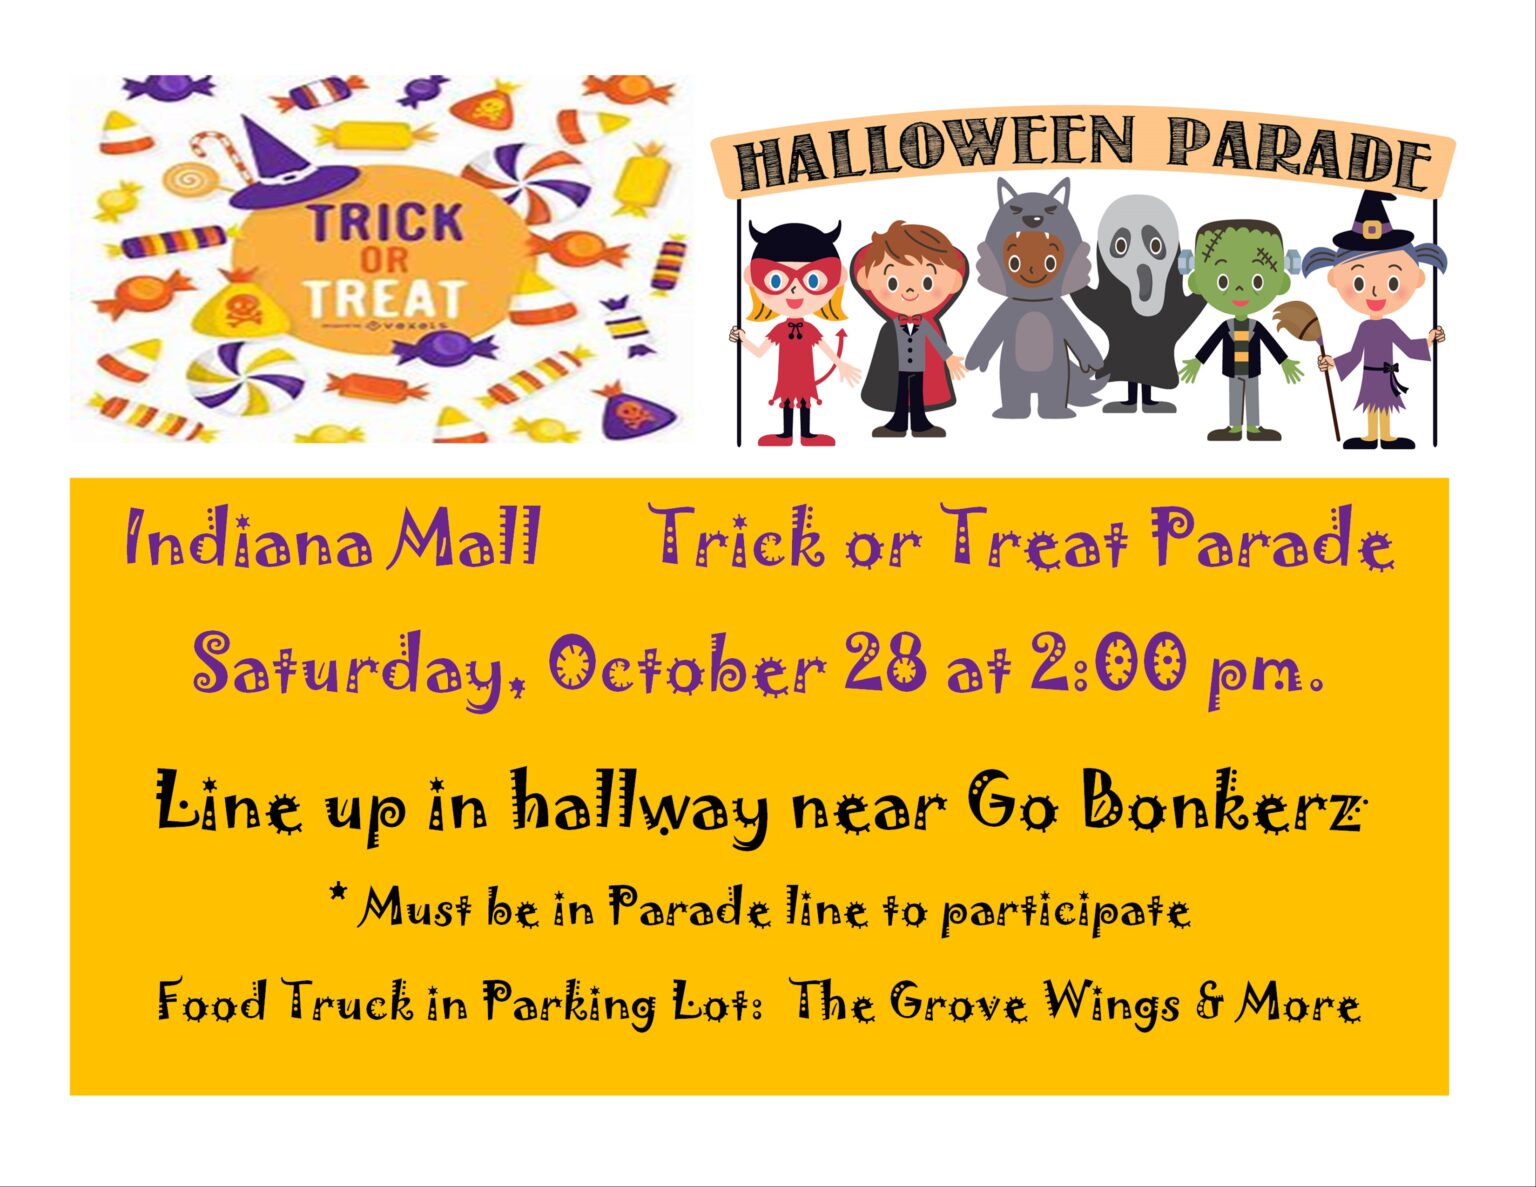 Trick or Treat at the Indiana Mall Visit Indiana County Pennsylvania